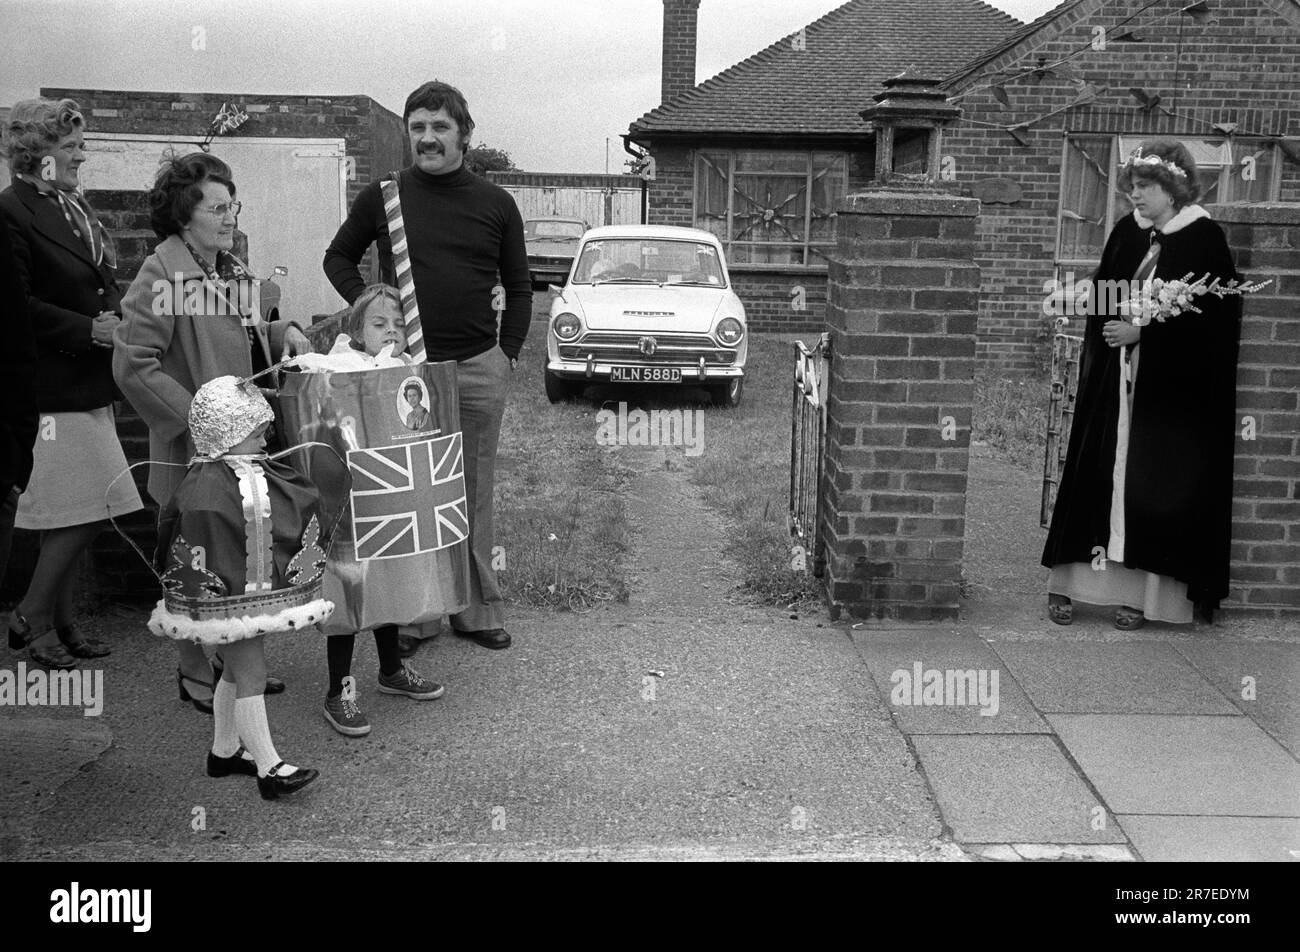 Queen Elizabeth II Silver Jubilee celebration 1977. Spring Bank Holiday Monday the residents Betterton Road hold a celebratory Silver Jubilee street party and elect a Silver Jubilee Queen. Rainham, Essex, England 6th June 1977. Stock Photo